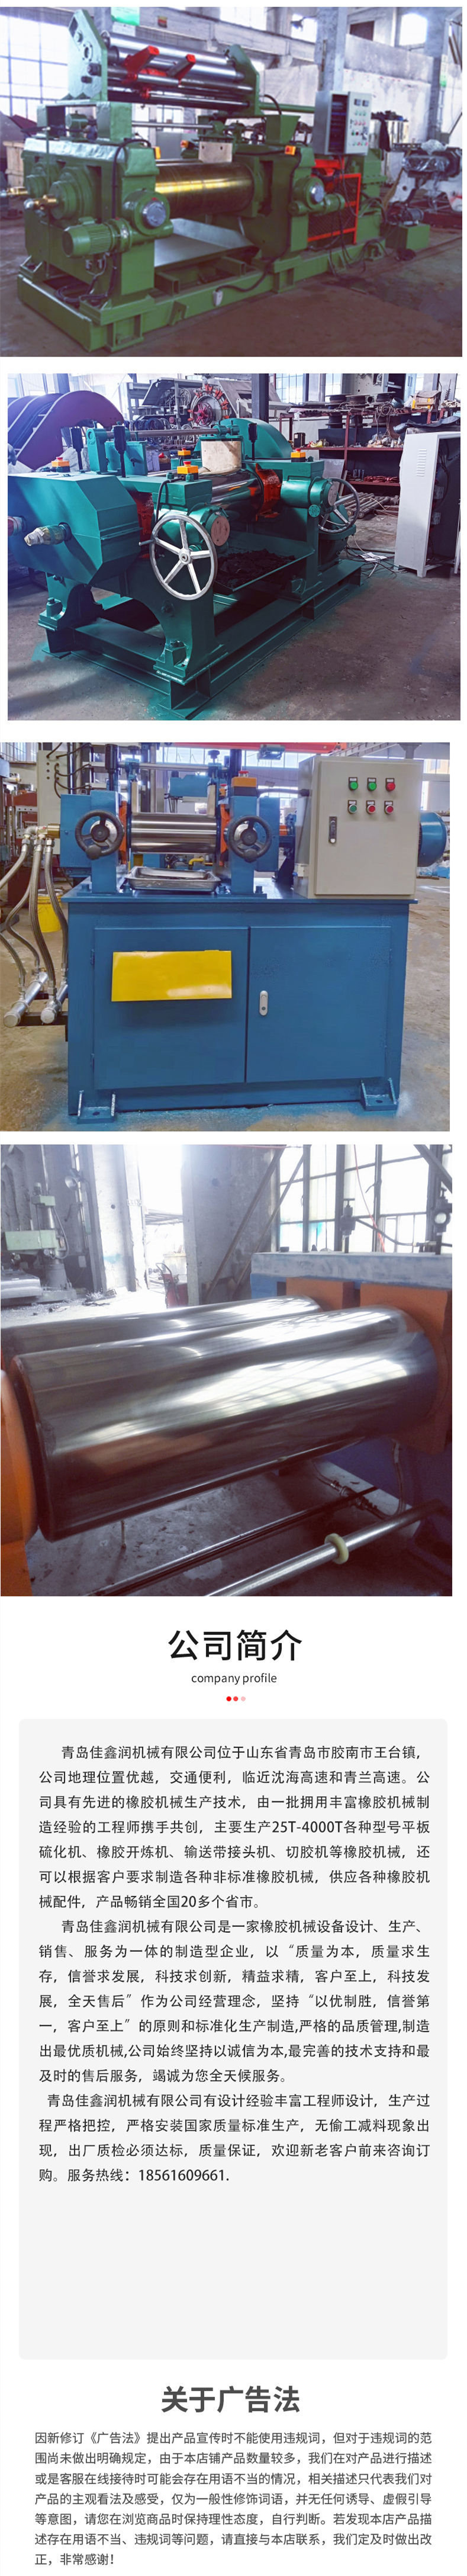 Jiaxin Run 14 inch Bearing Thin Oil Lubrication Rubber Refining Machine-360 Hard Toothed Surface Reducer - Support Customization